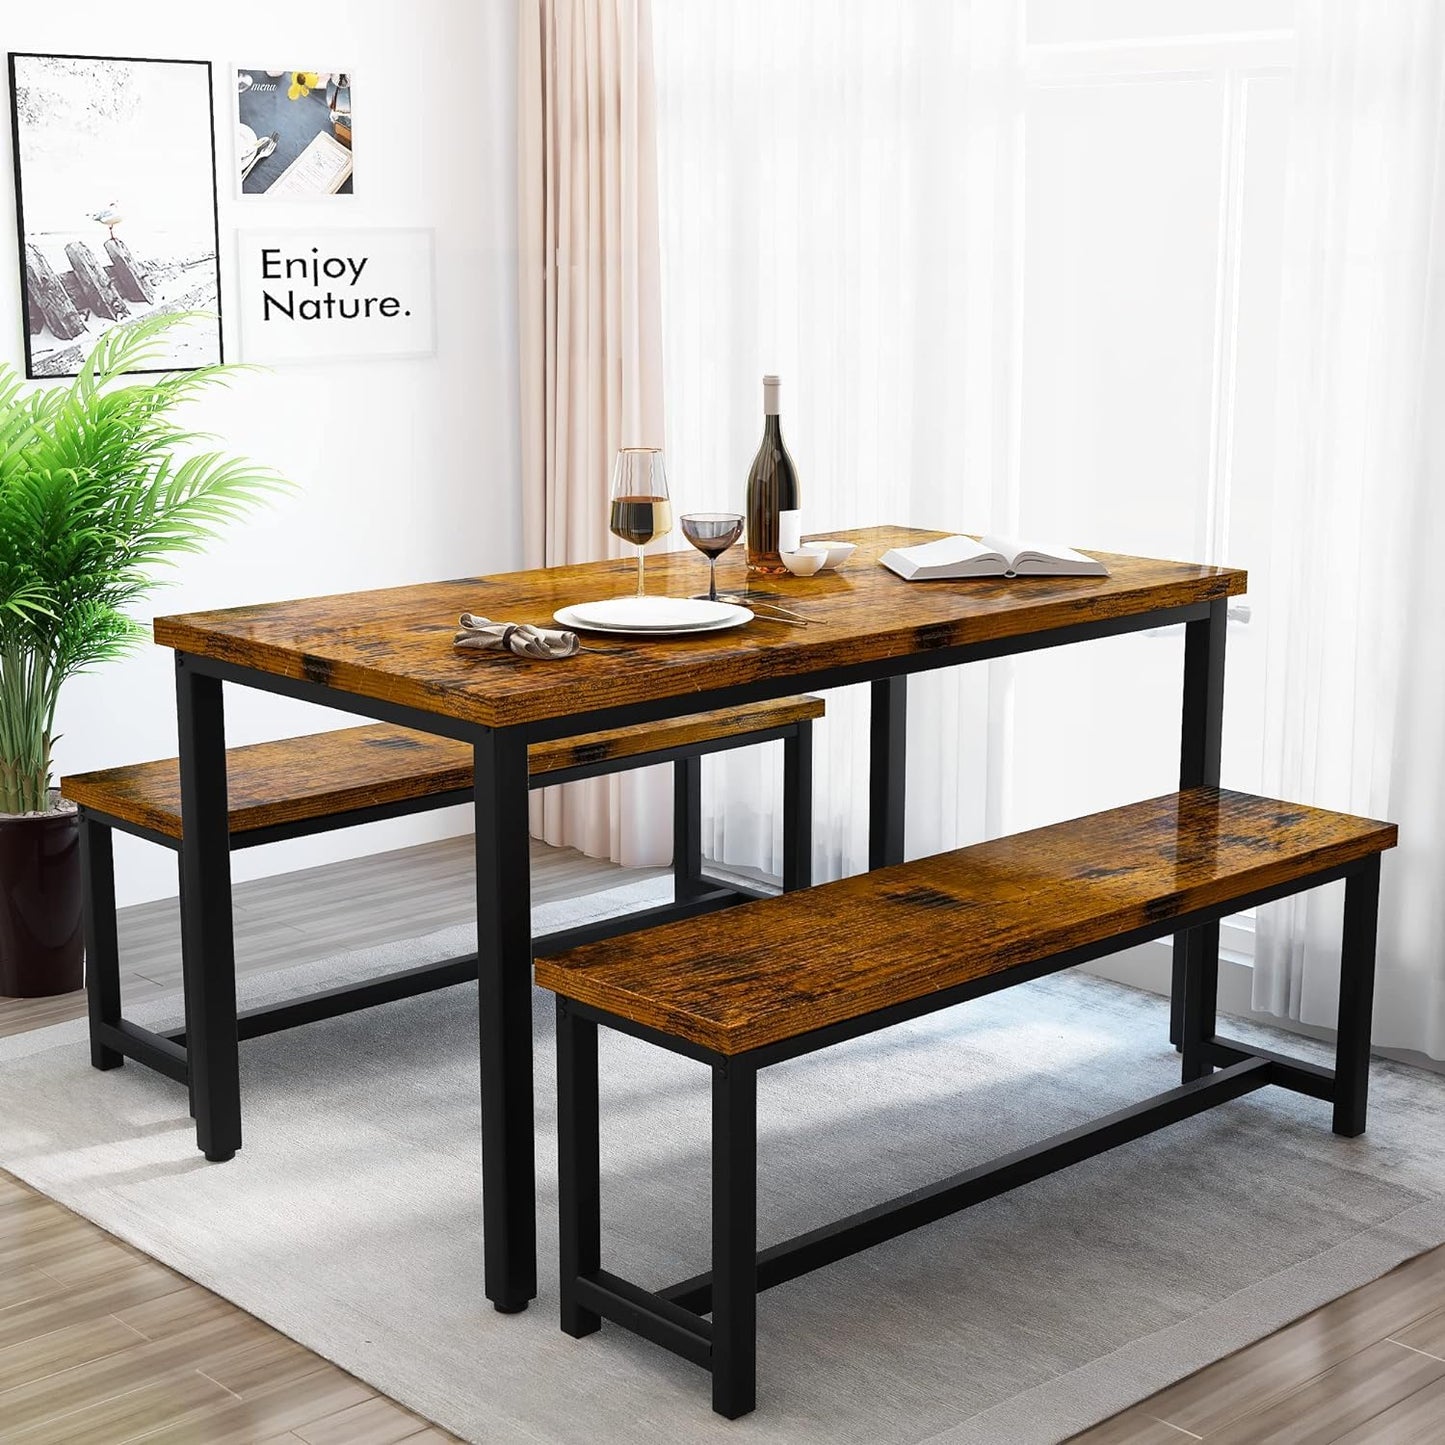 Recaceik Dining Table Set for 4, Kitchen Table Set with 2 Benches, 3 Piece Dining Room Table Set, Modern Wood Kitchen Table and Chairs for Small Spaces, Kitchen,Dining Room, Restaurant, Rustic Brown